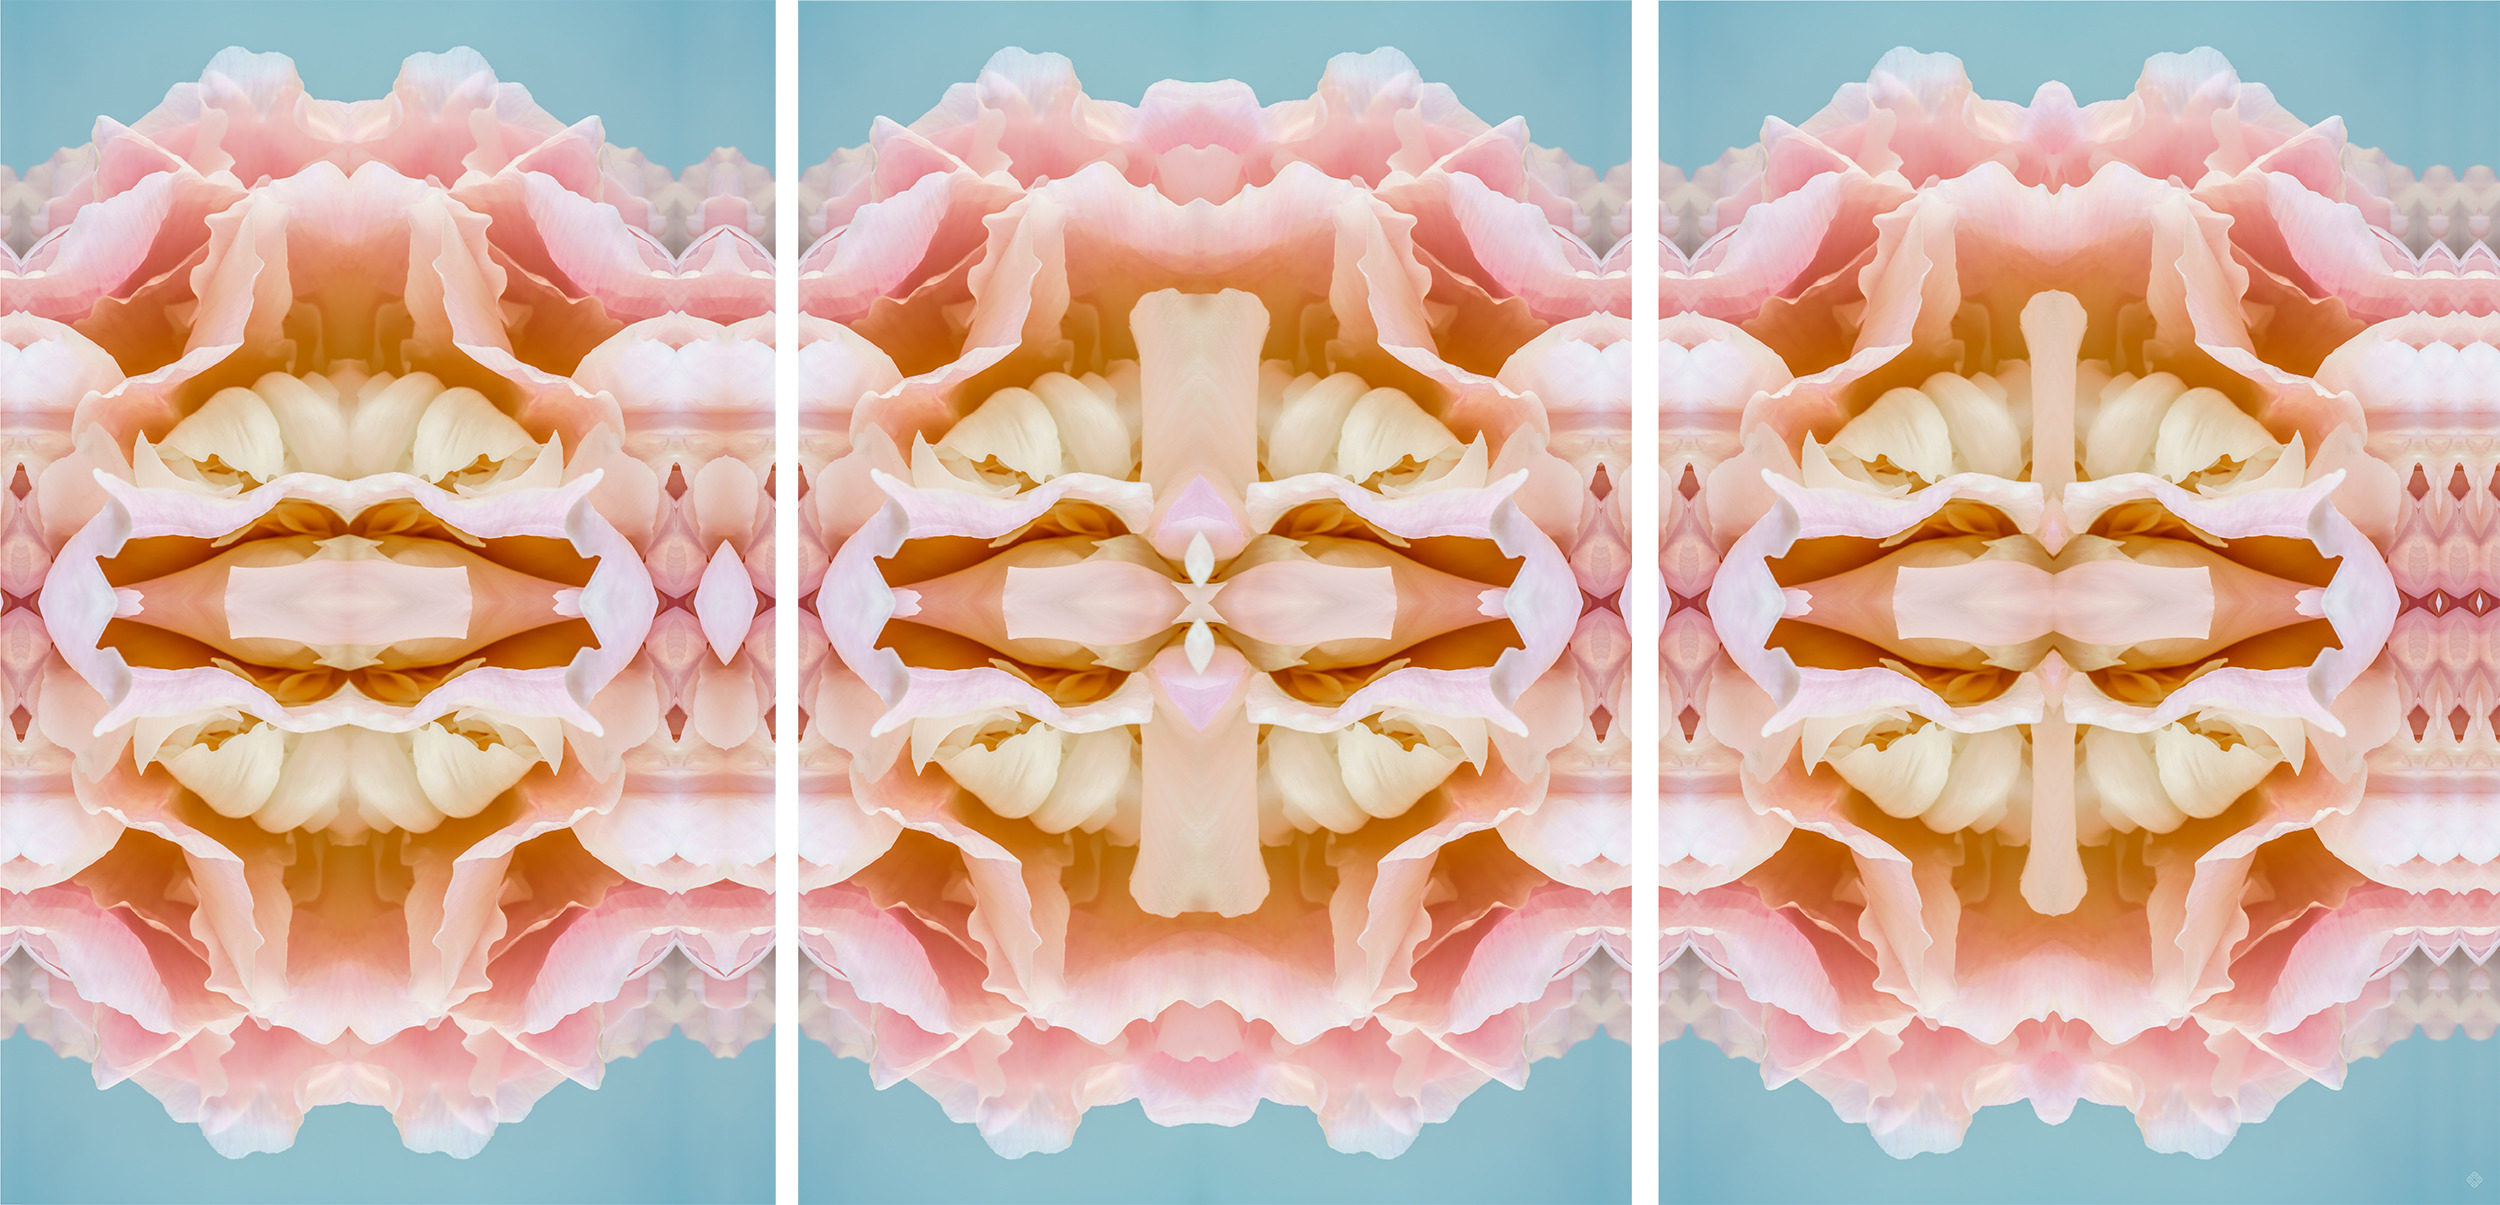 
        <div class='title'>
          kate wilson blushseries 3 photographic design 53x108 inches
        </div>
       